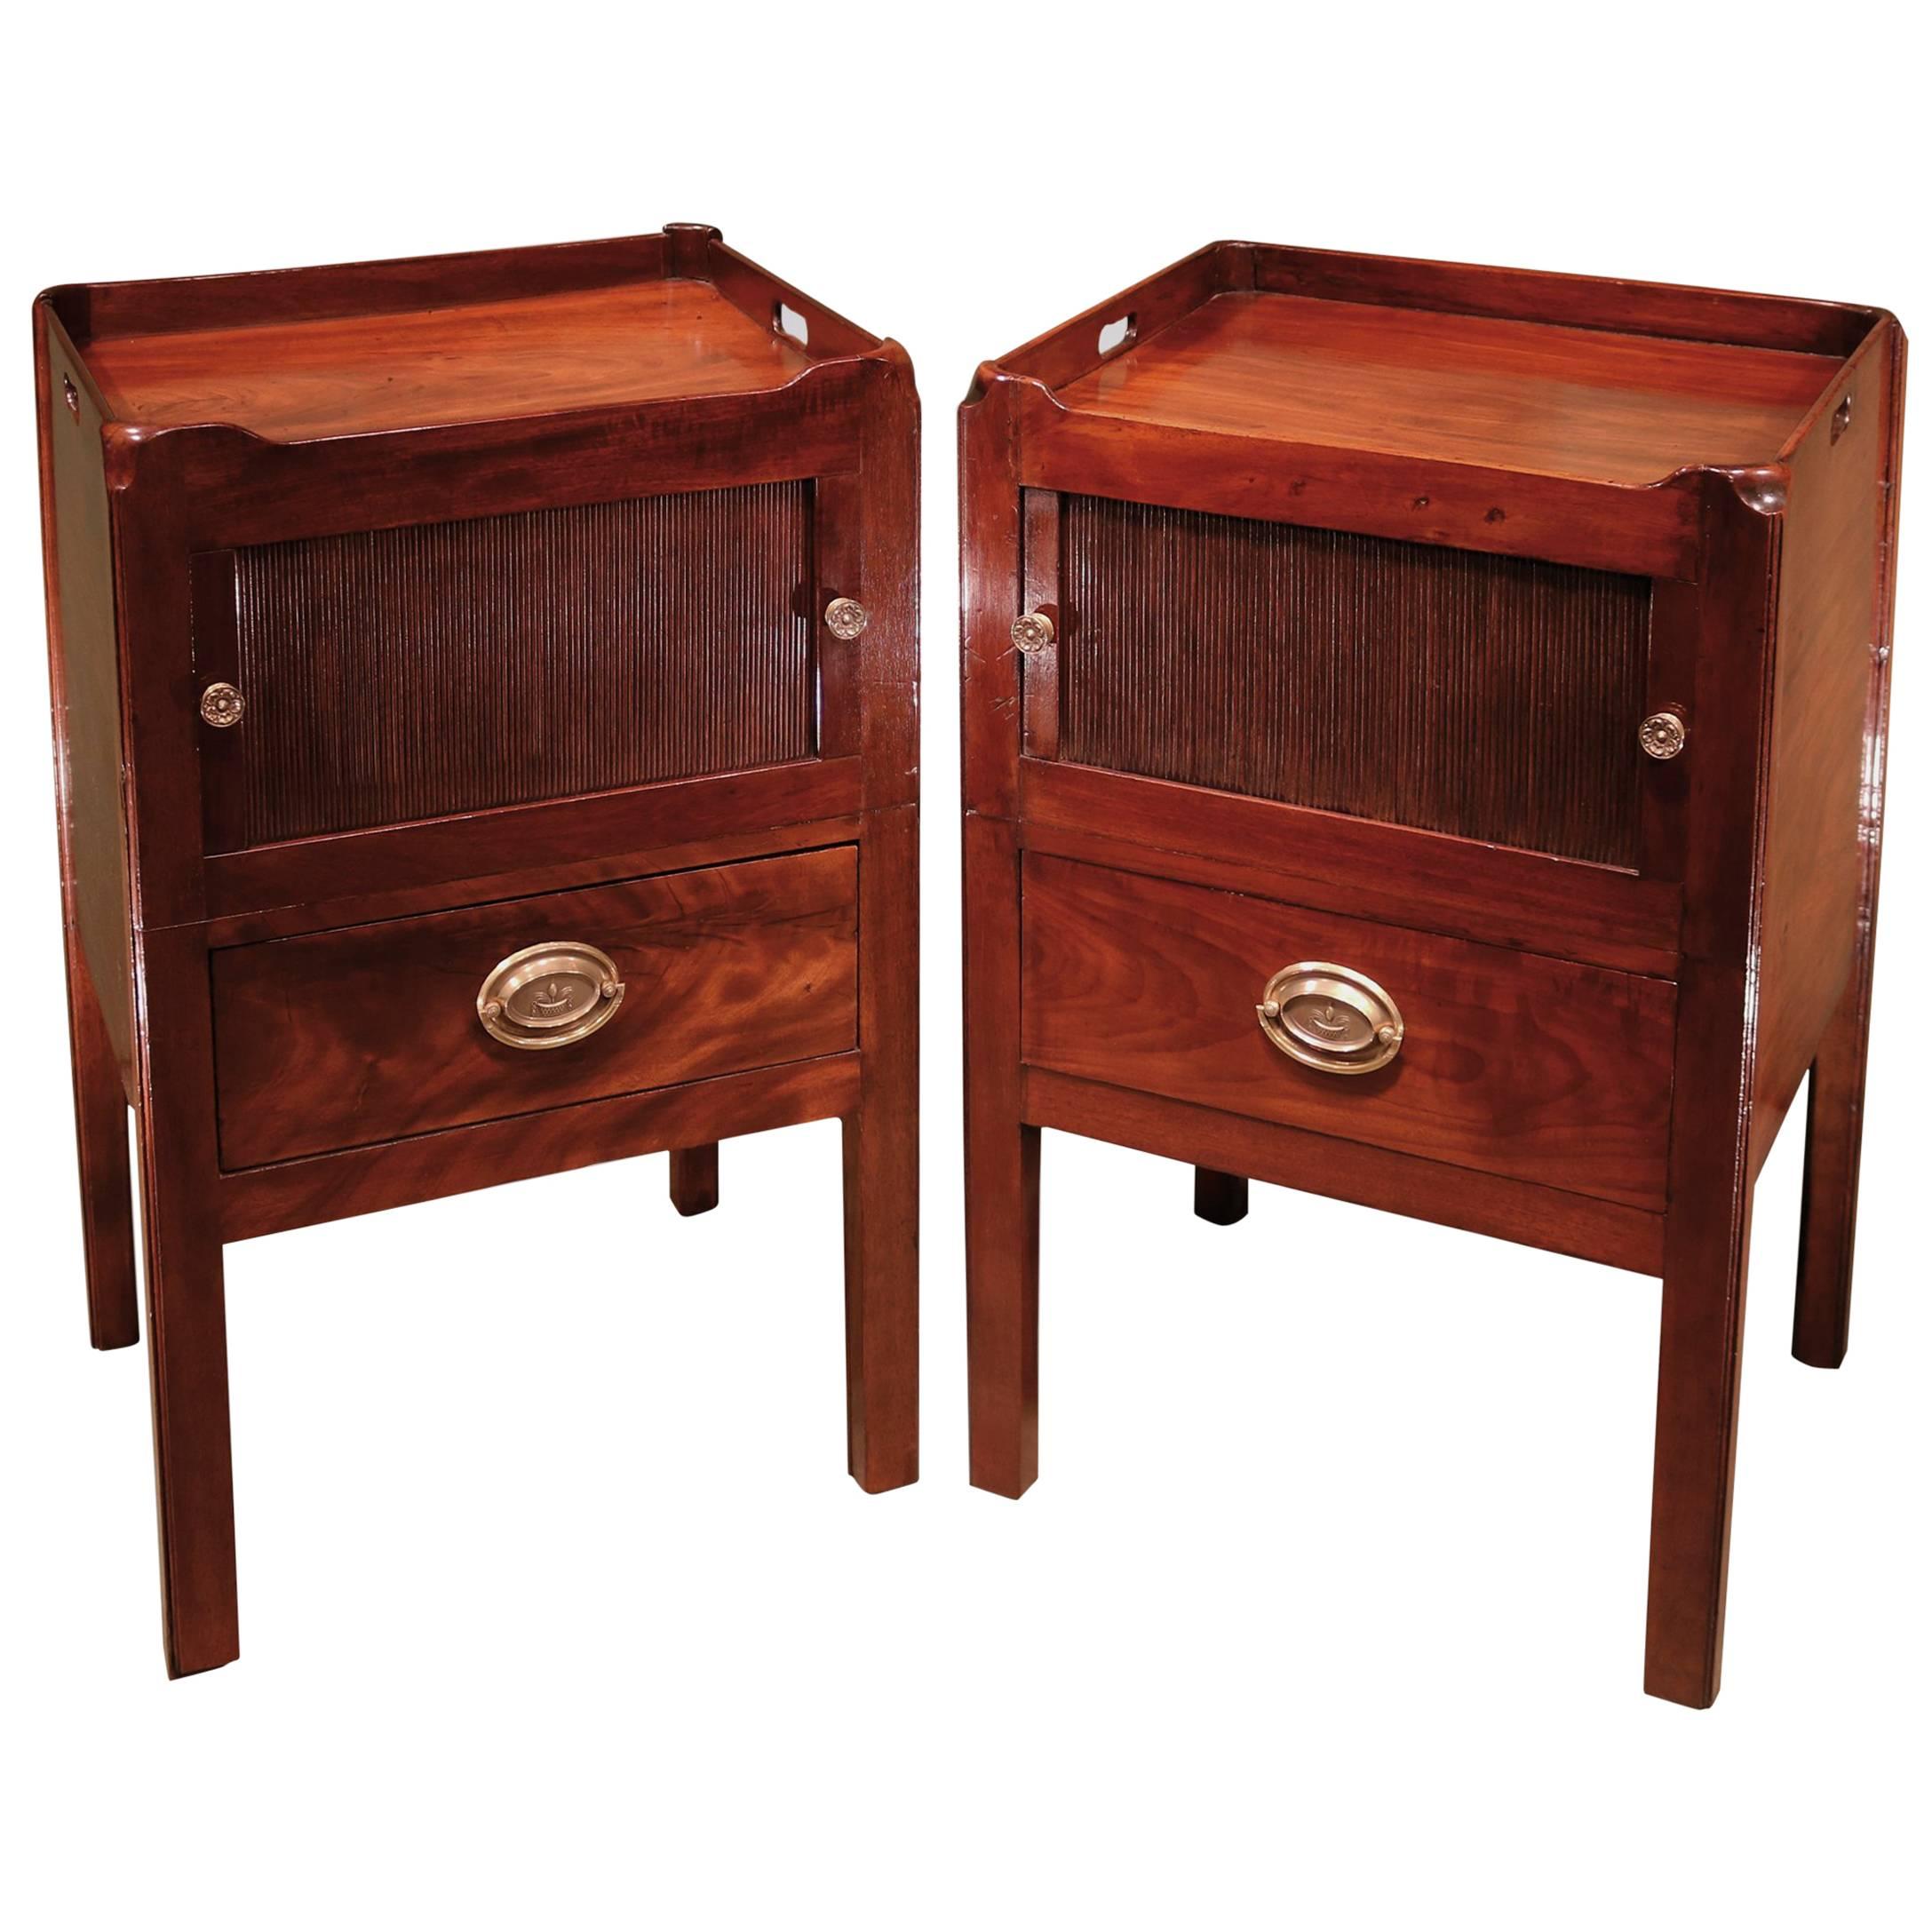 George III period mahogany bedside cabinets with tray tops